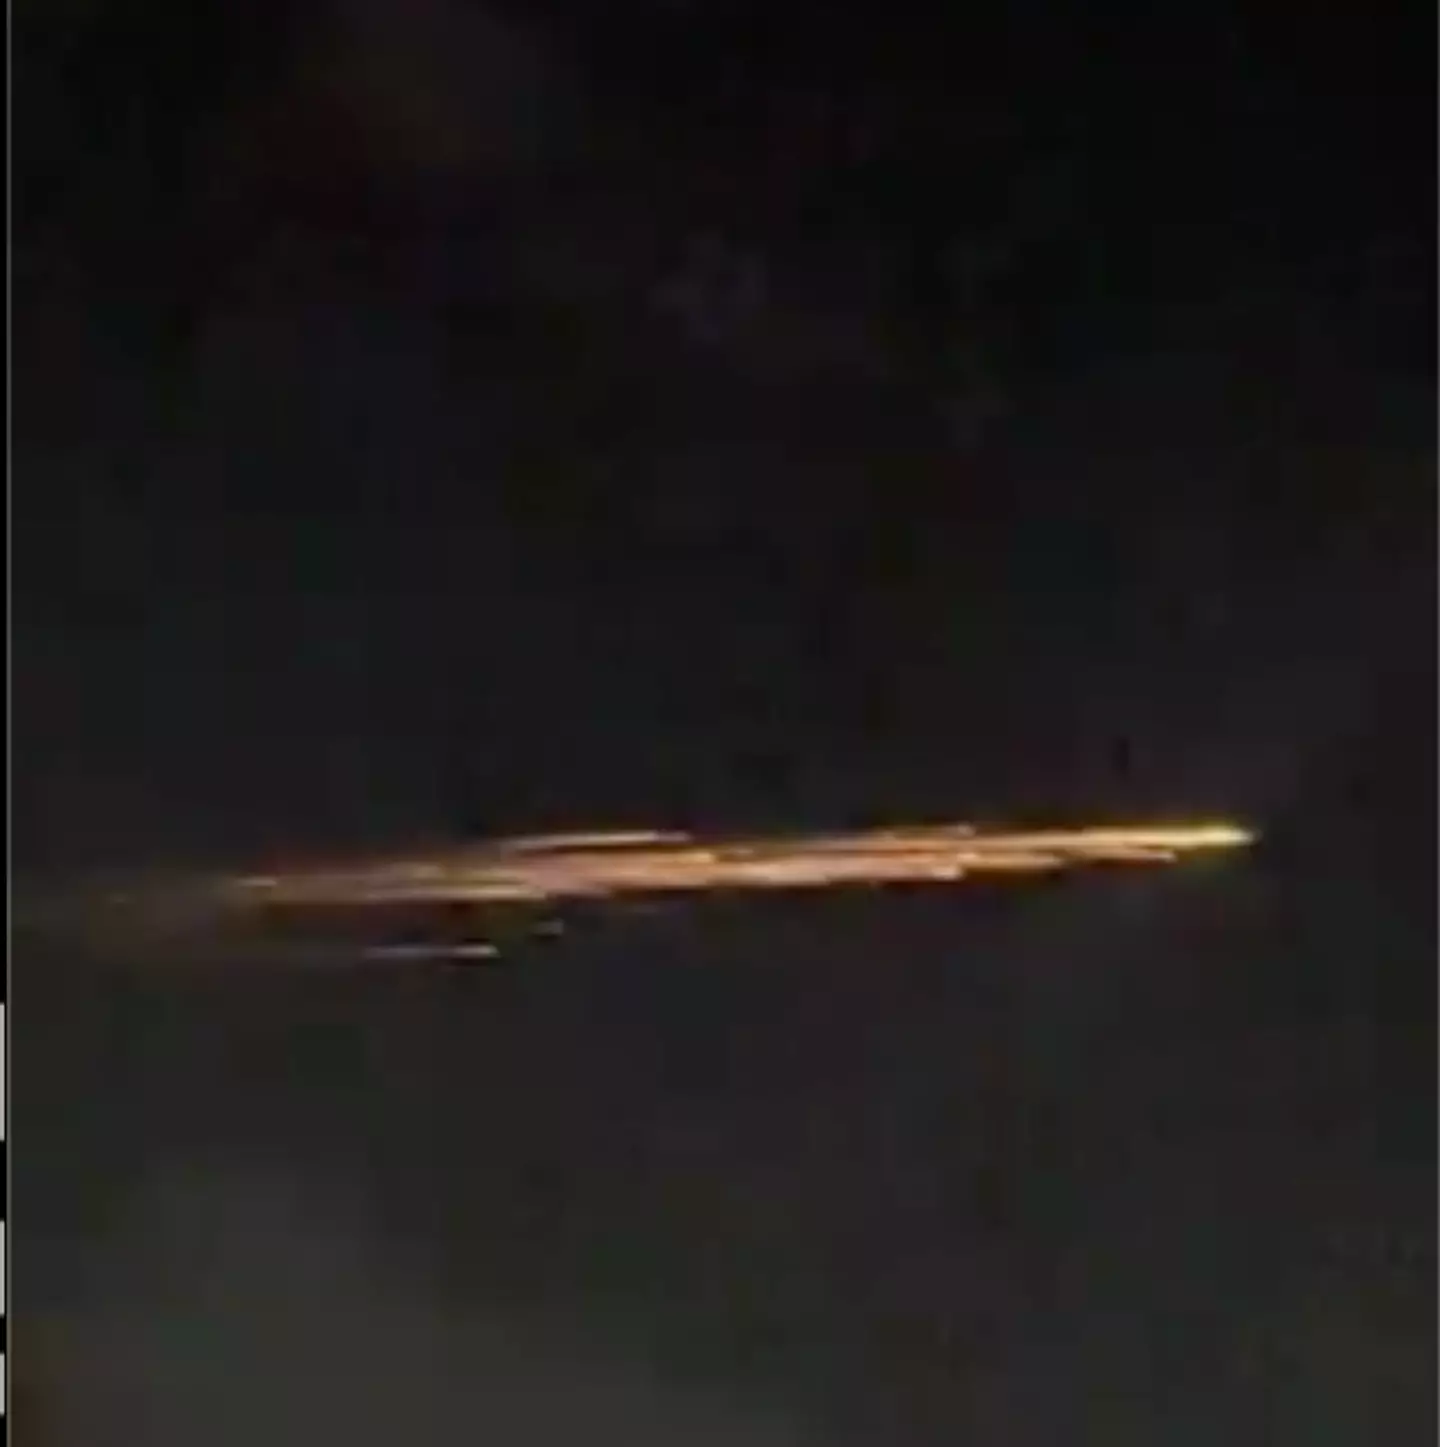 The object was seen moving across the sky.